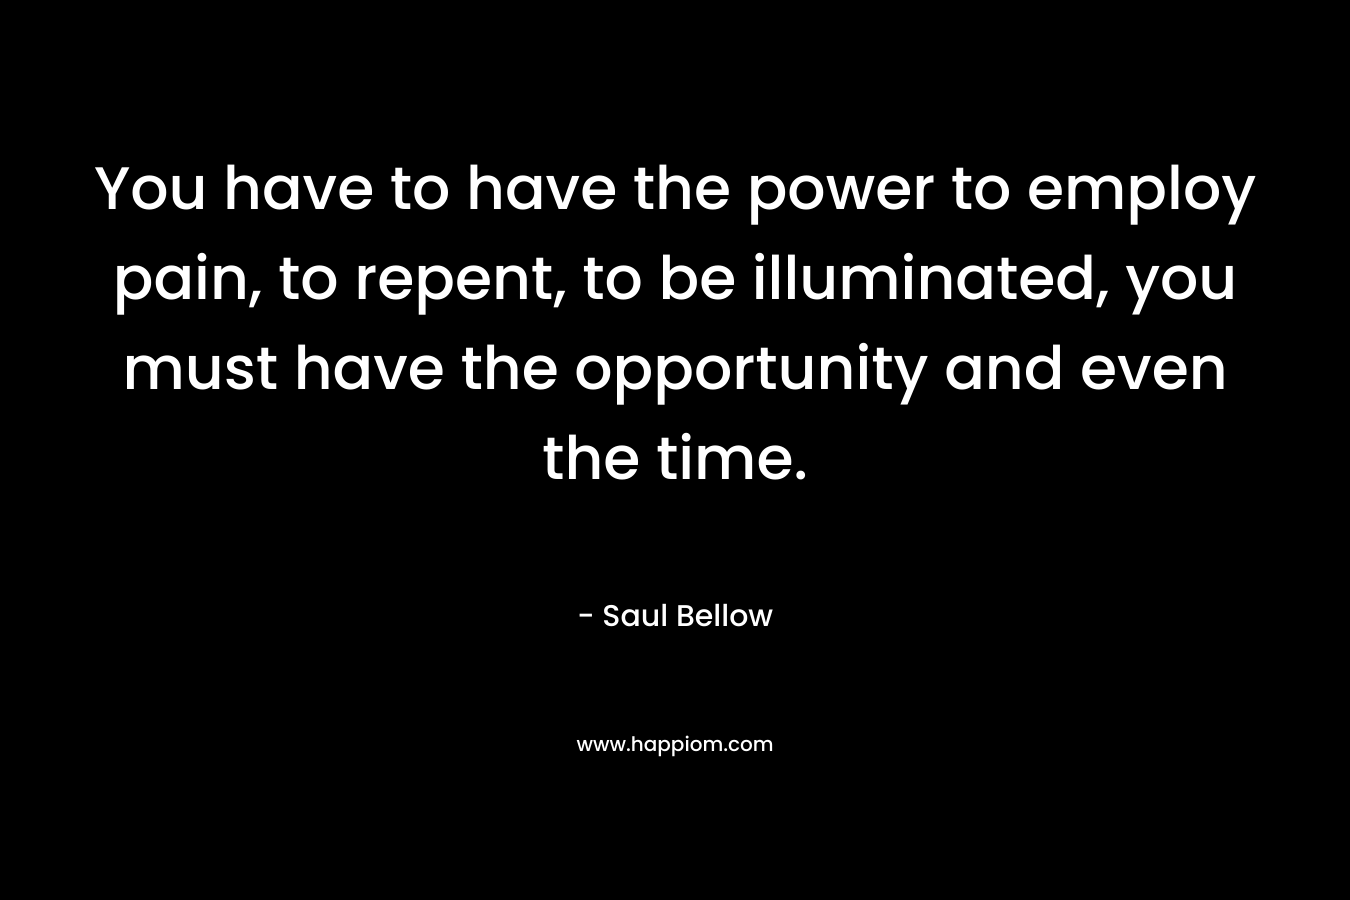 You have to have the power to employ pain, to repent, to be illuminated, you must have the opportunity and even the time.